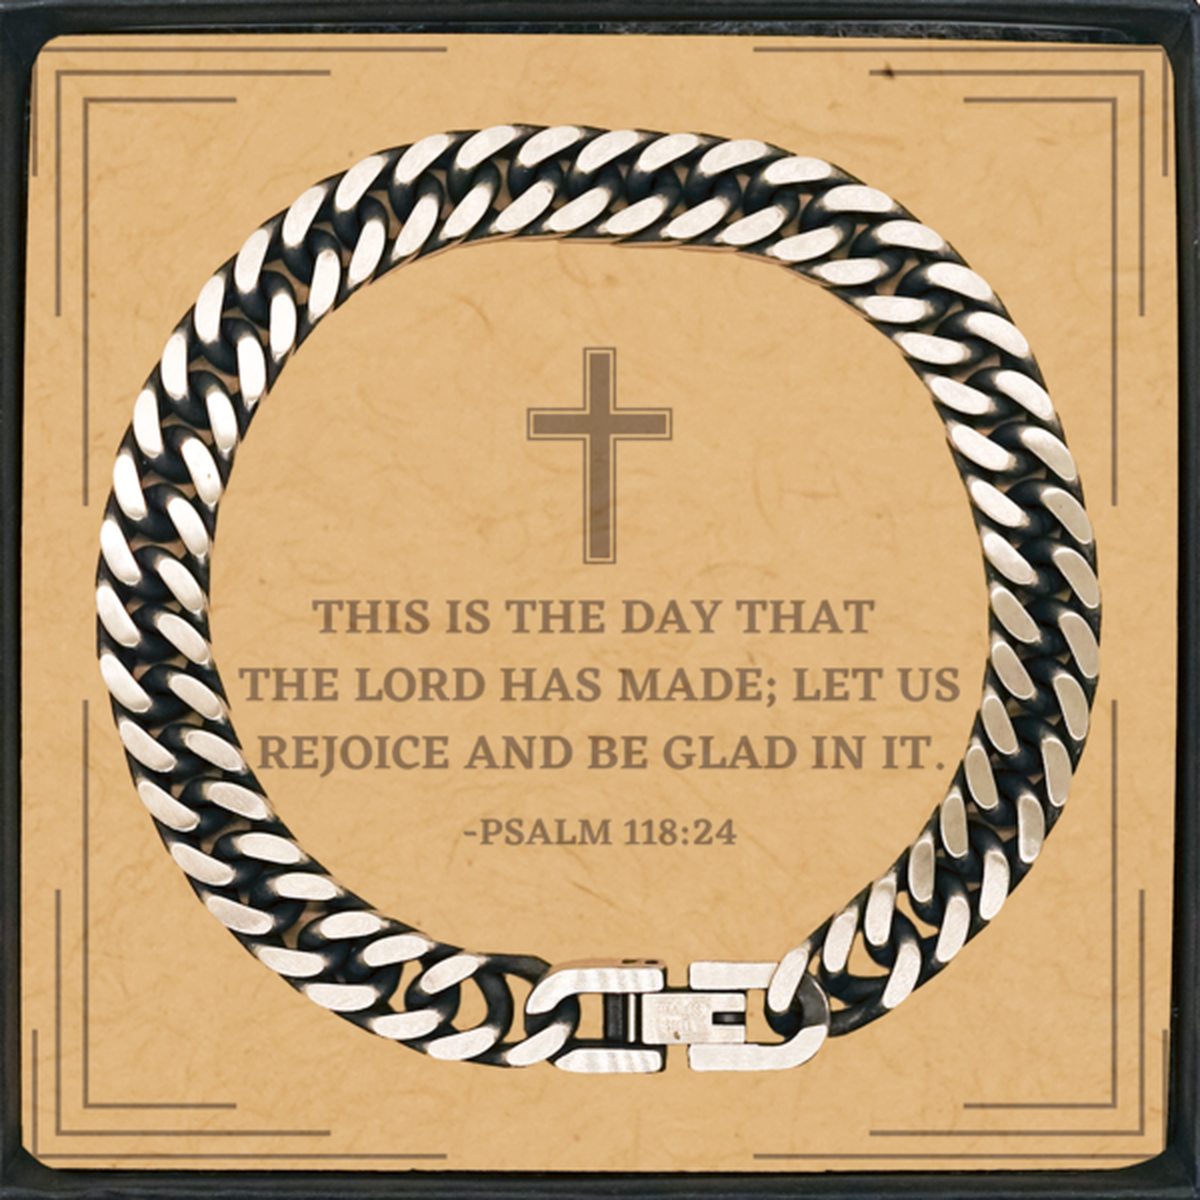 Baptism Gifts For Teenage Boys Girls, Christian Bible Verse Cuban Link Chain Bracelet, This is the day that the lord has made, Confirmation Gifts, Bible Verse Card for Son, Godson, Grandson